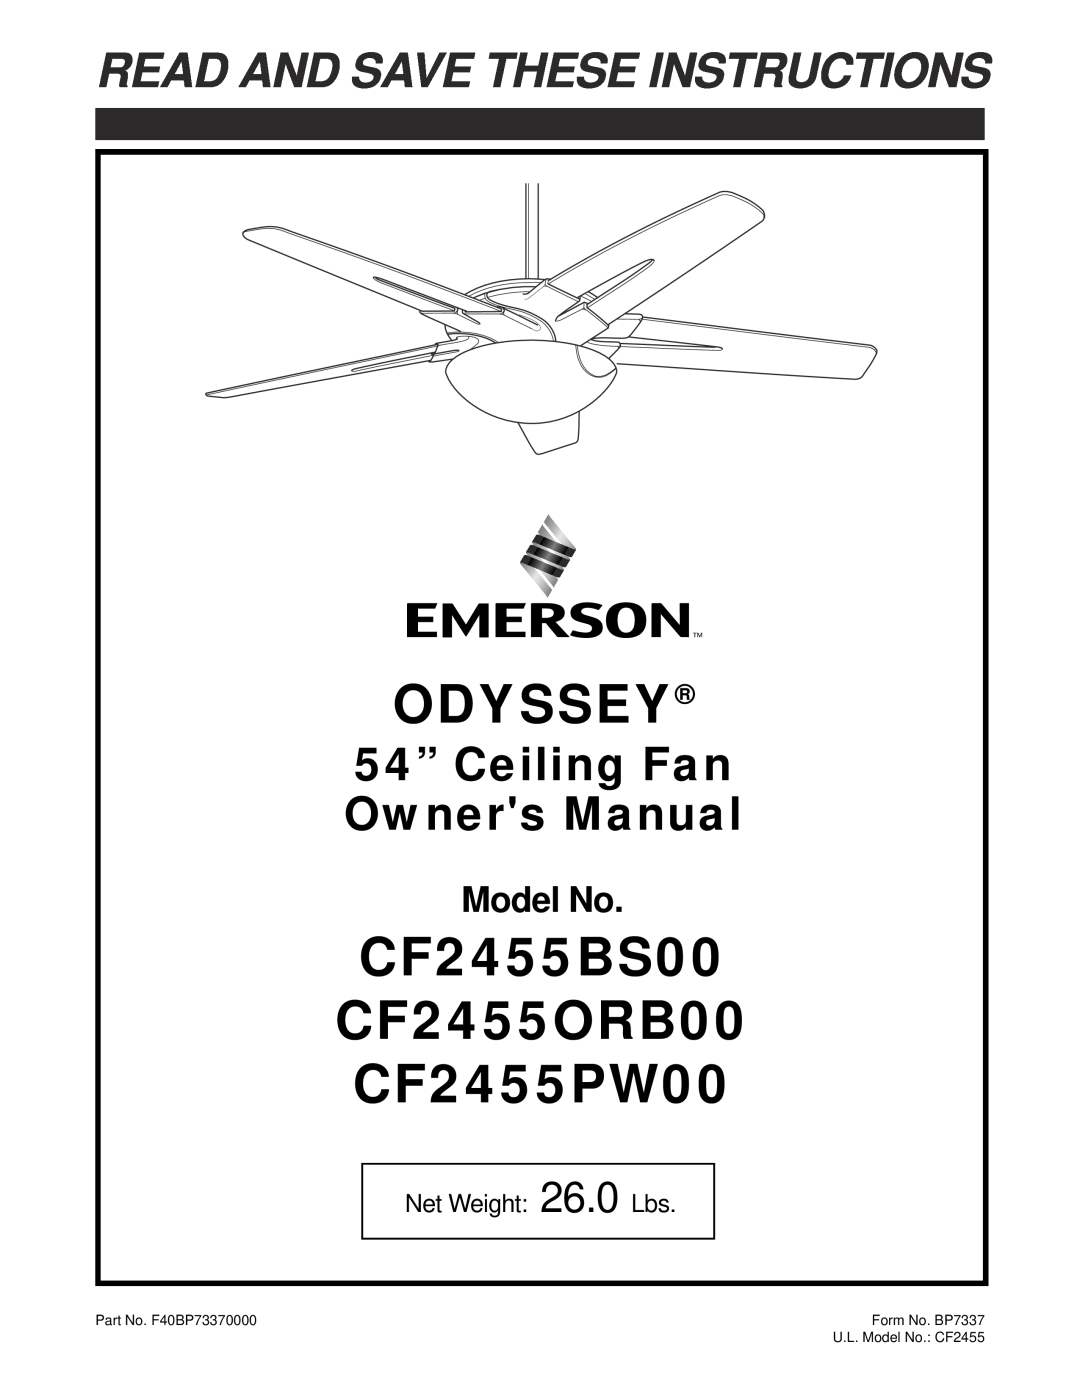 Emerson owner manual Odyssey, CF2455BS00 CF2455ORB00 CF2455PW00, Read And Save These Instructions, Model No 